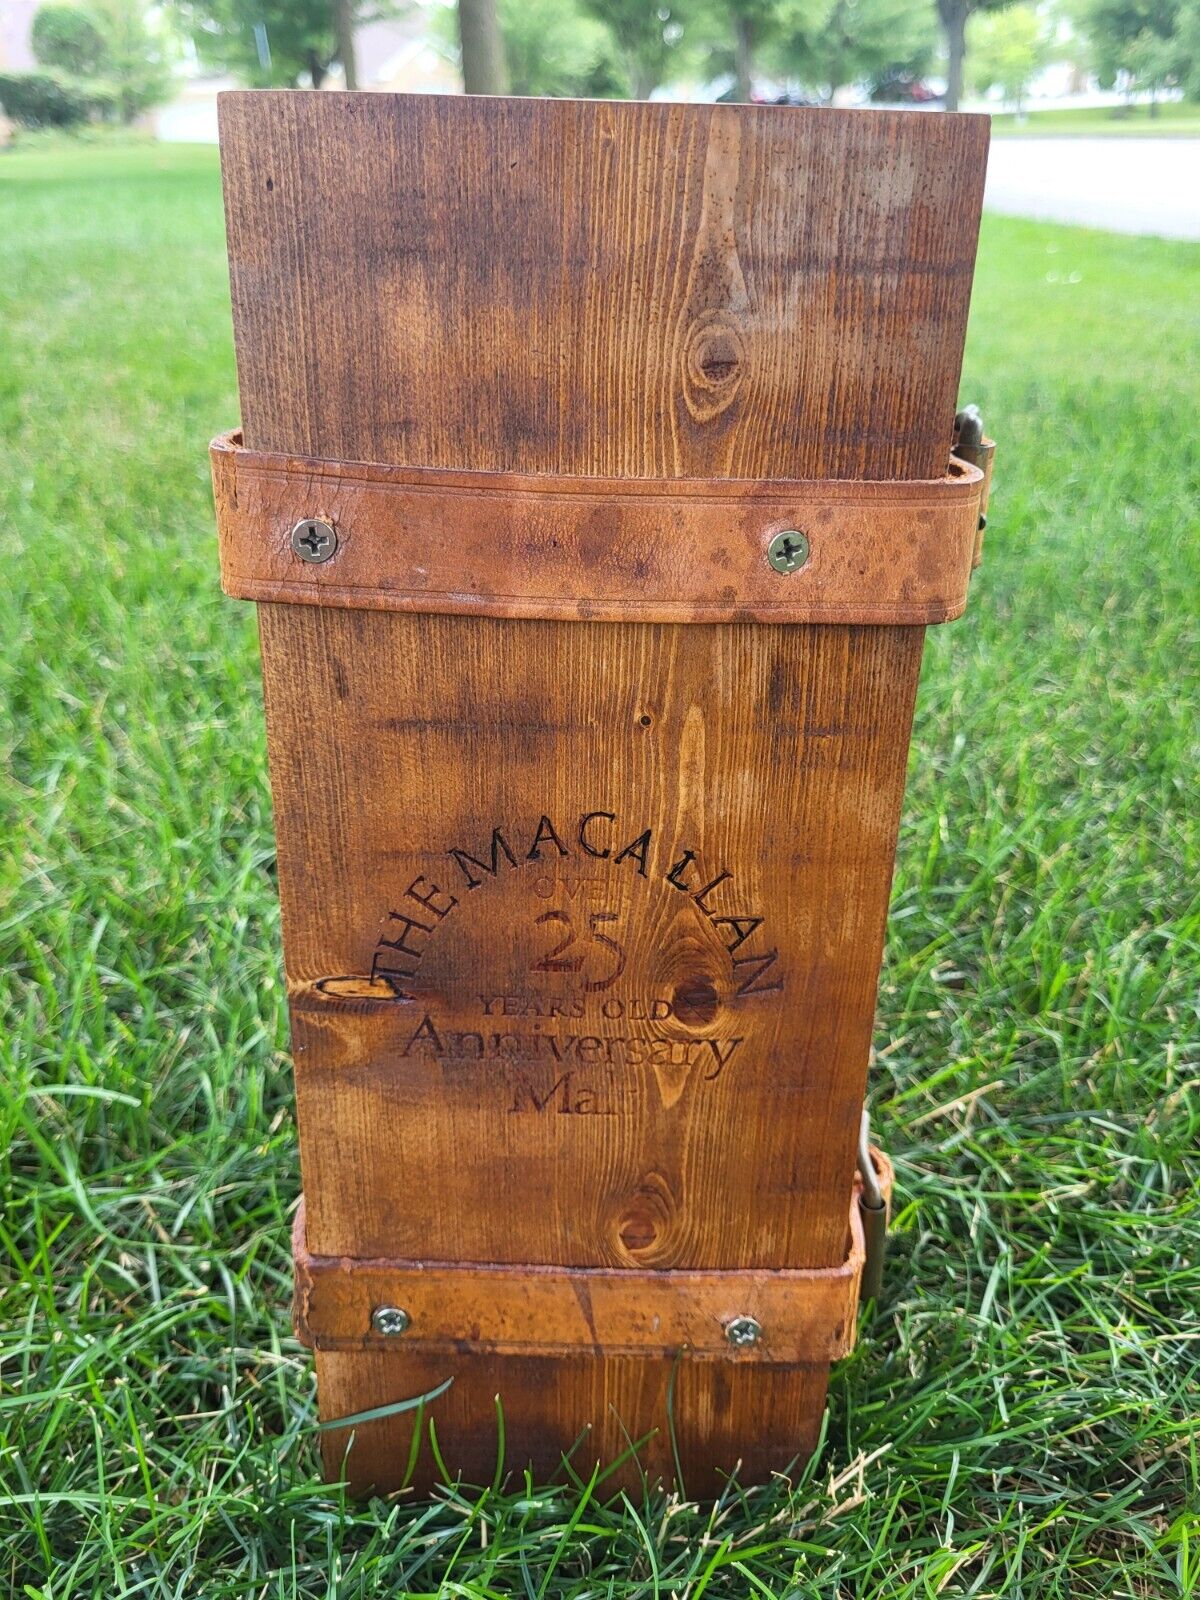 The Macallan Over 25 Years Old Anniversary Malt Leather Belted Box NO BOTTLE